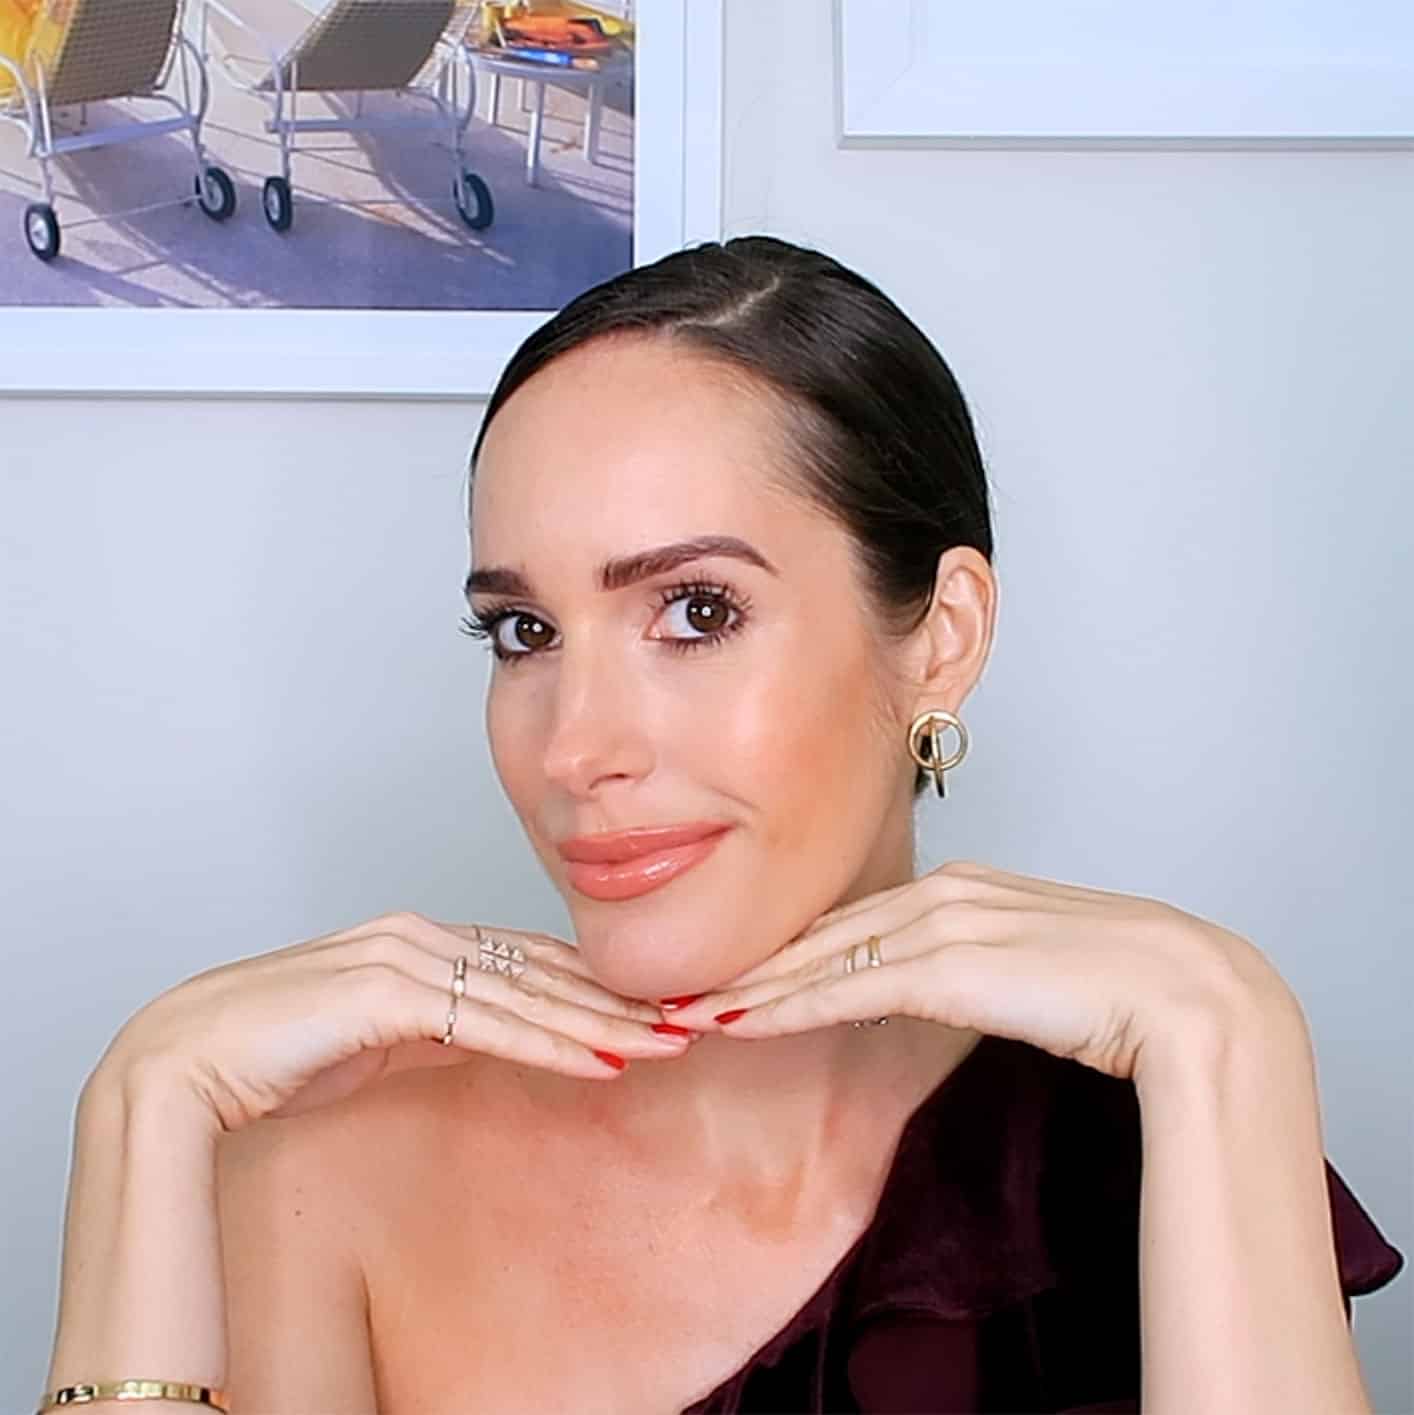 Louise Roe lip injections and tricks to fuller looking lips